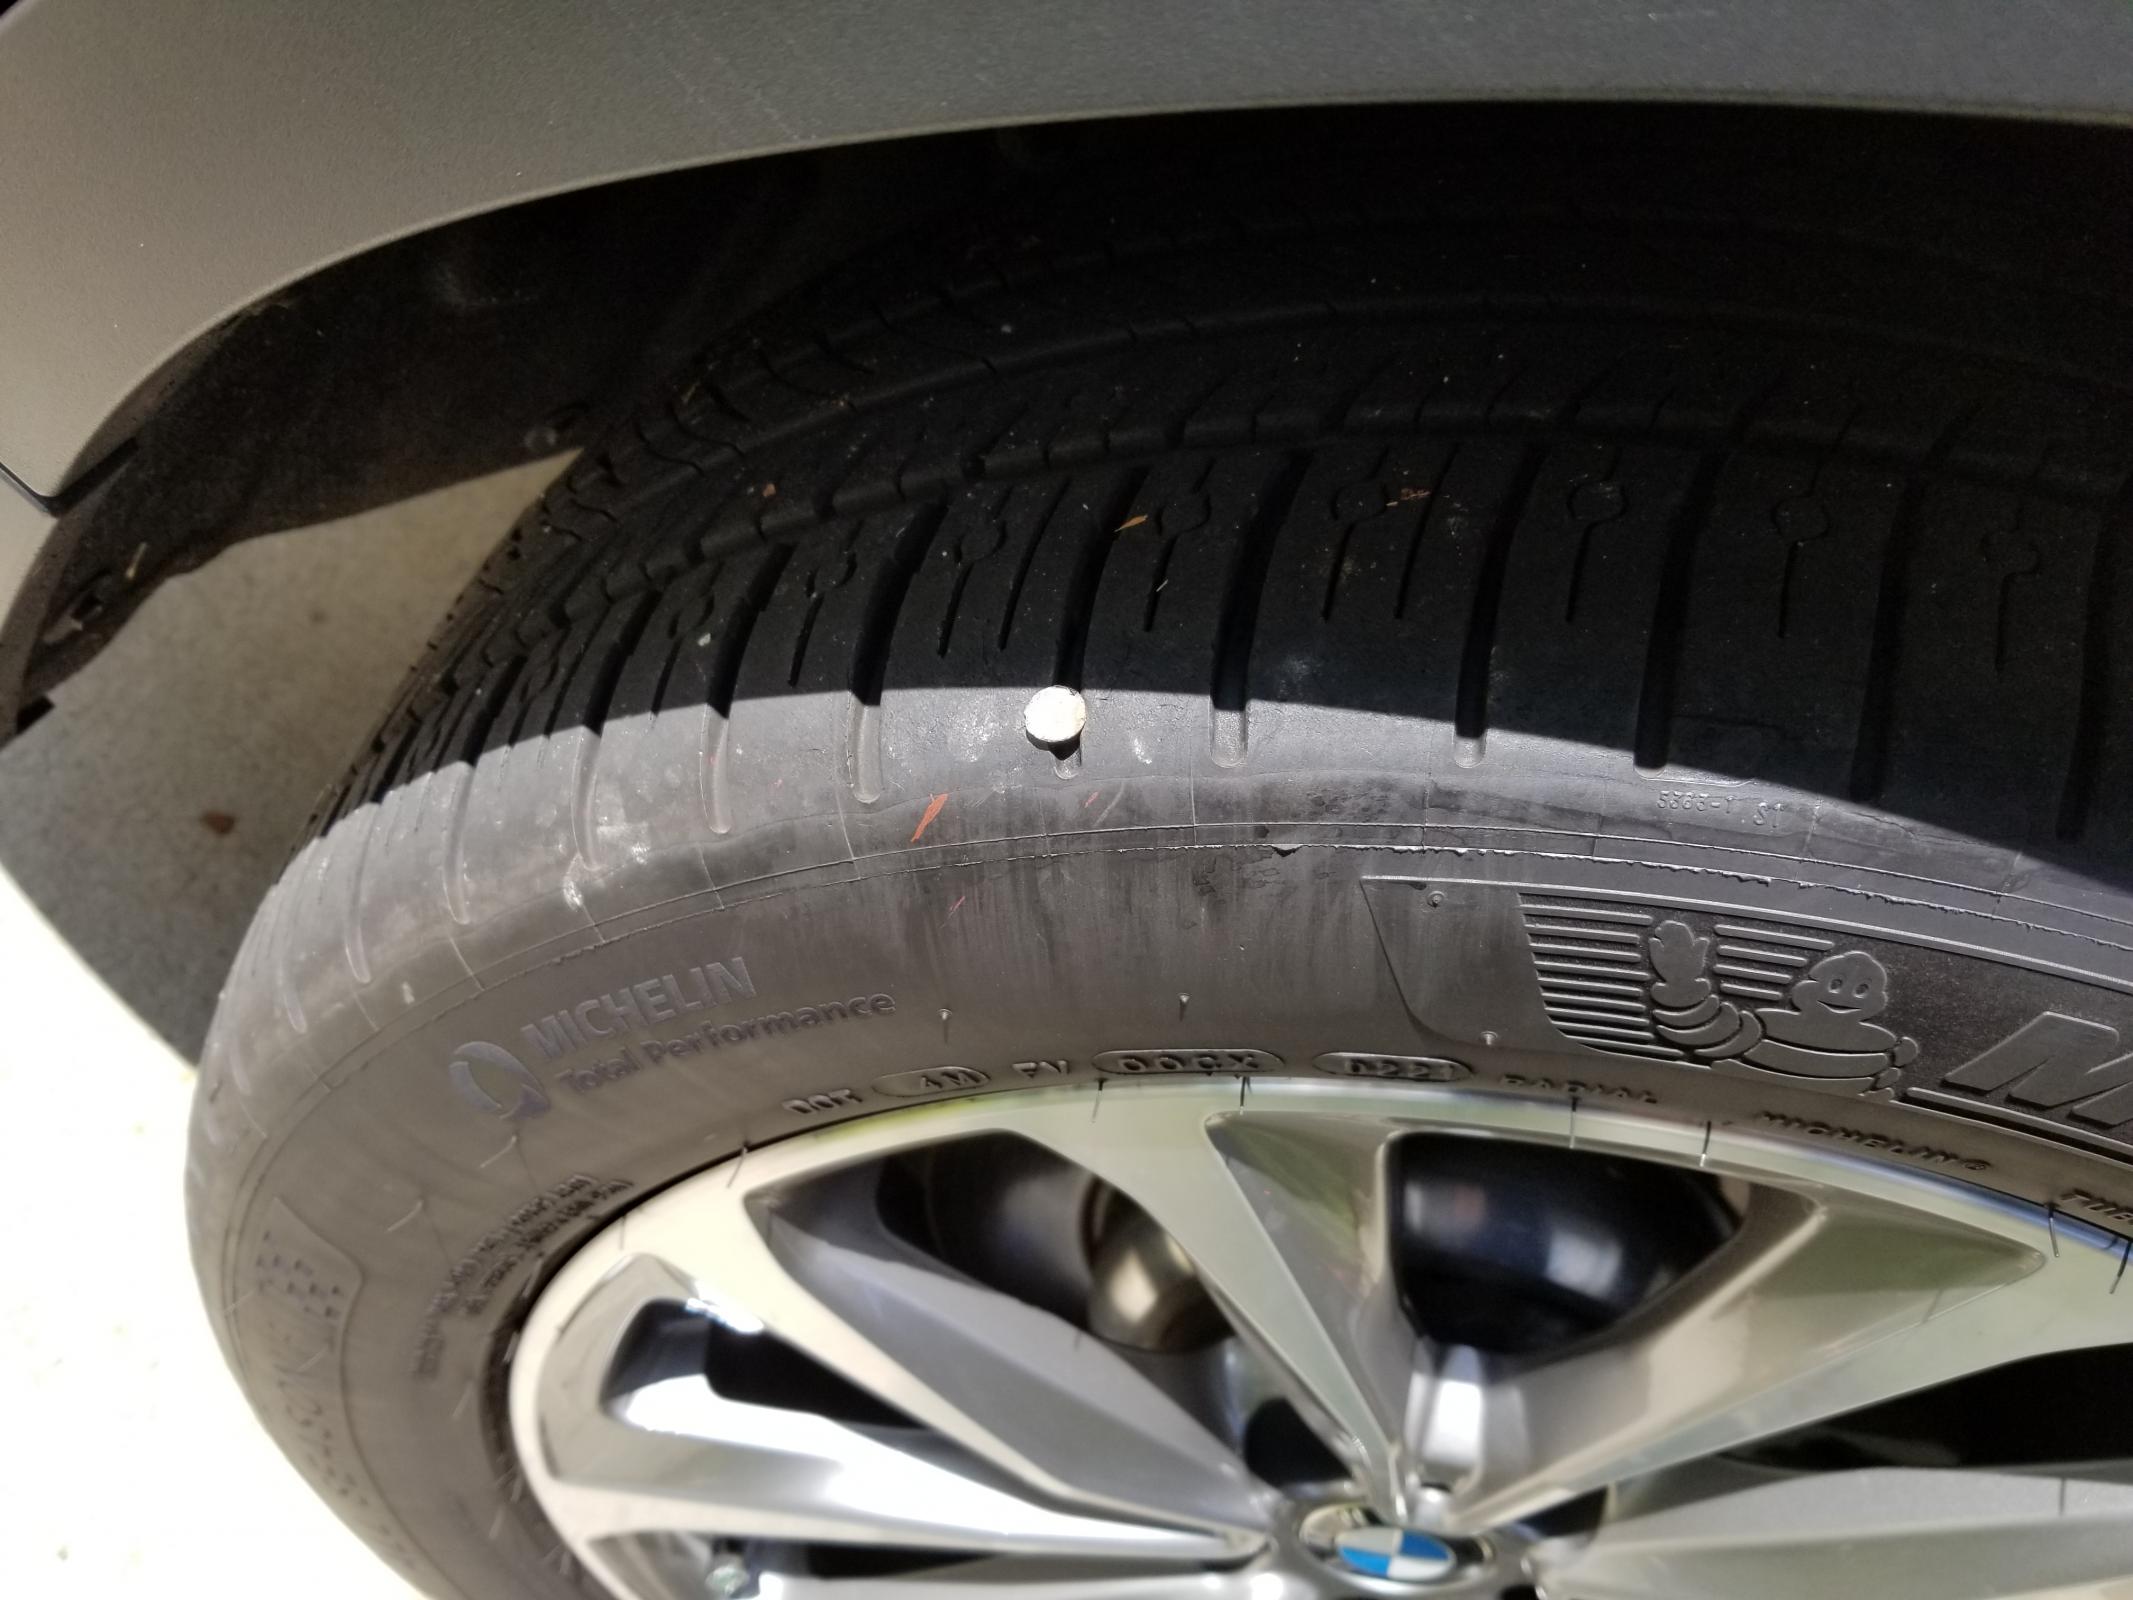 Nail Puncture on Tire Shoulder - XBimmers | BMW X3 Forum